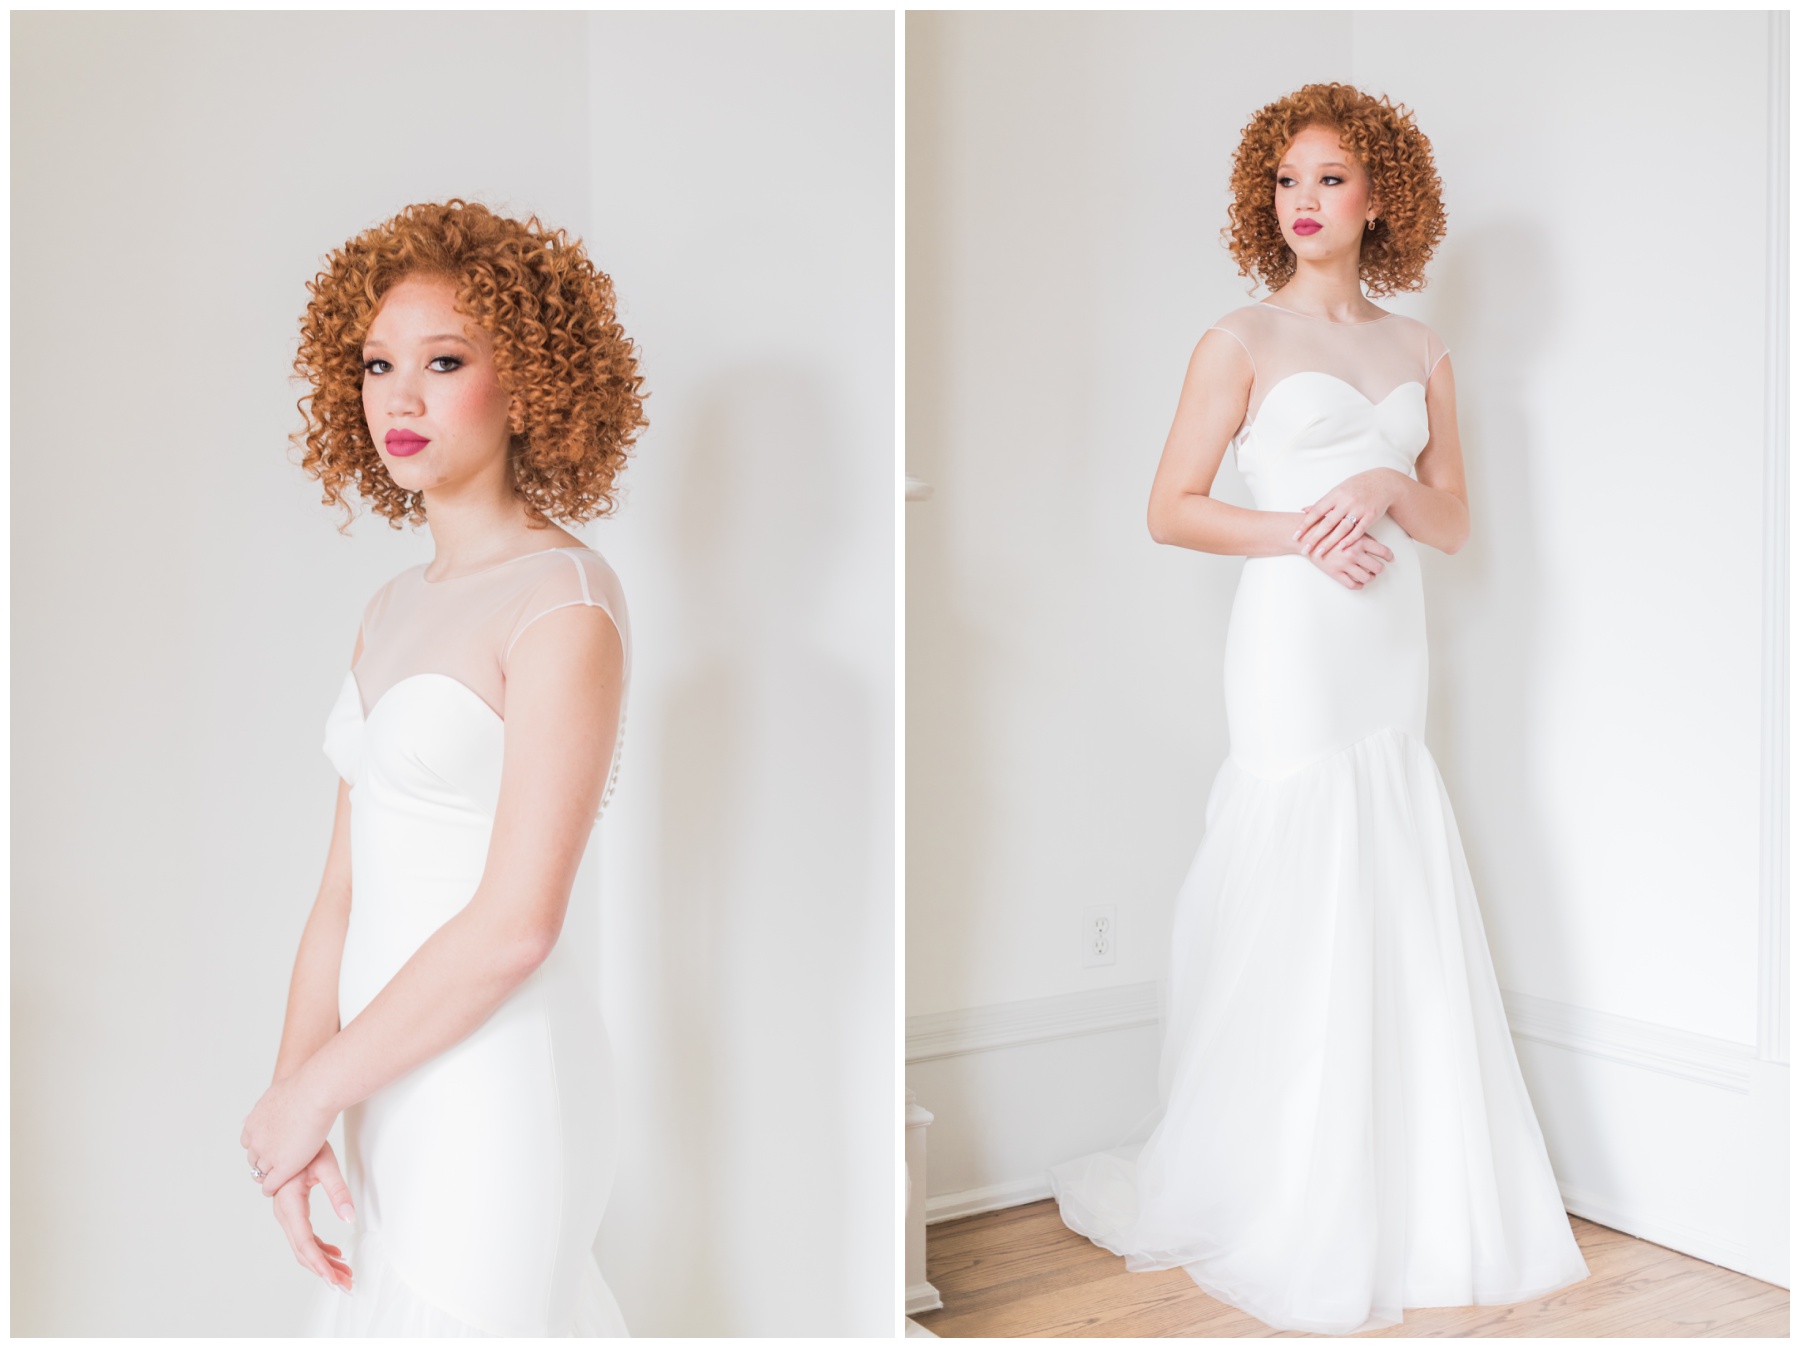 Modern crepe gown from BHLDN